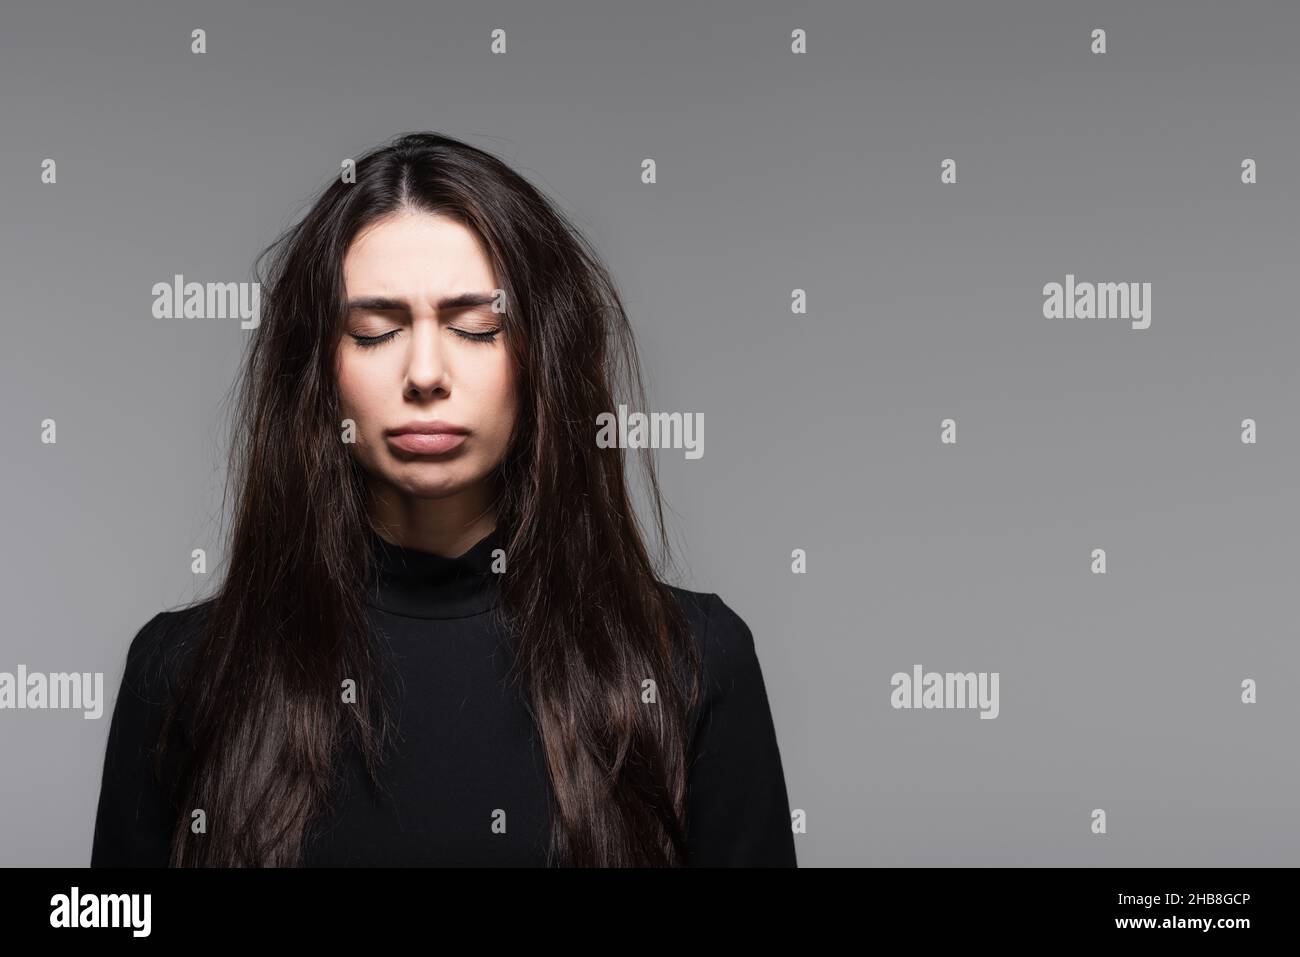 sad young woman in black turtleneck with damaged hair isolated on grey Stock Photo